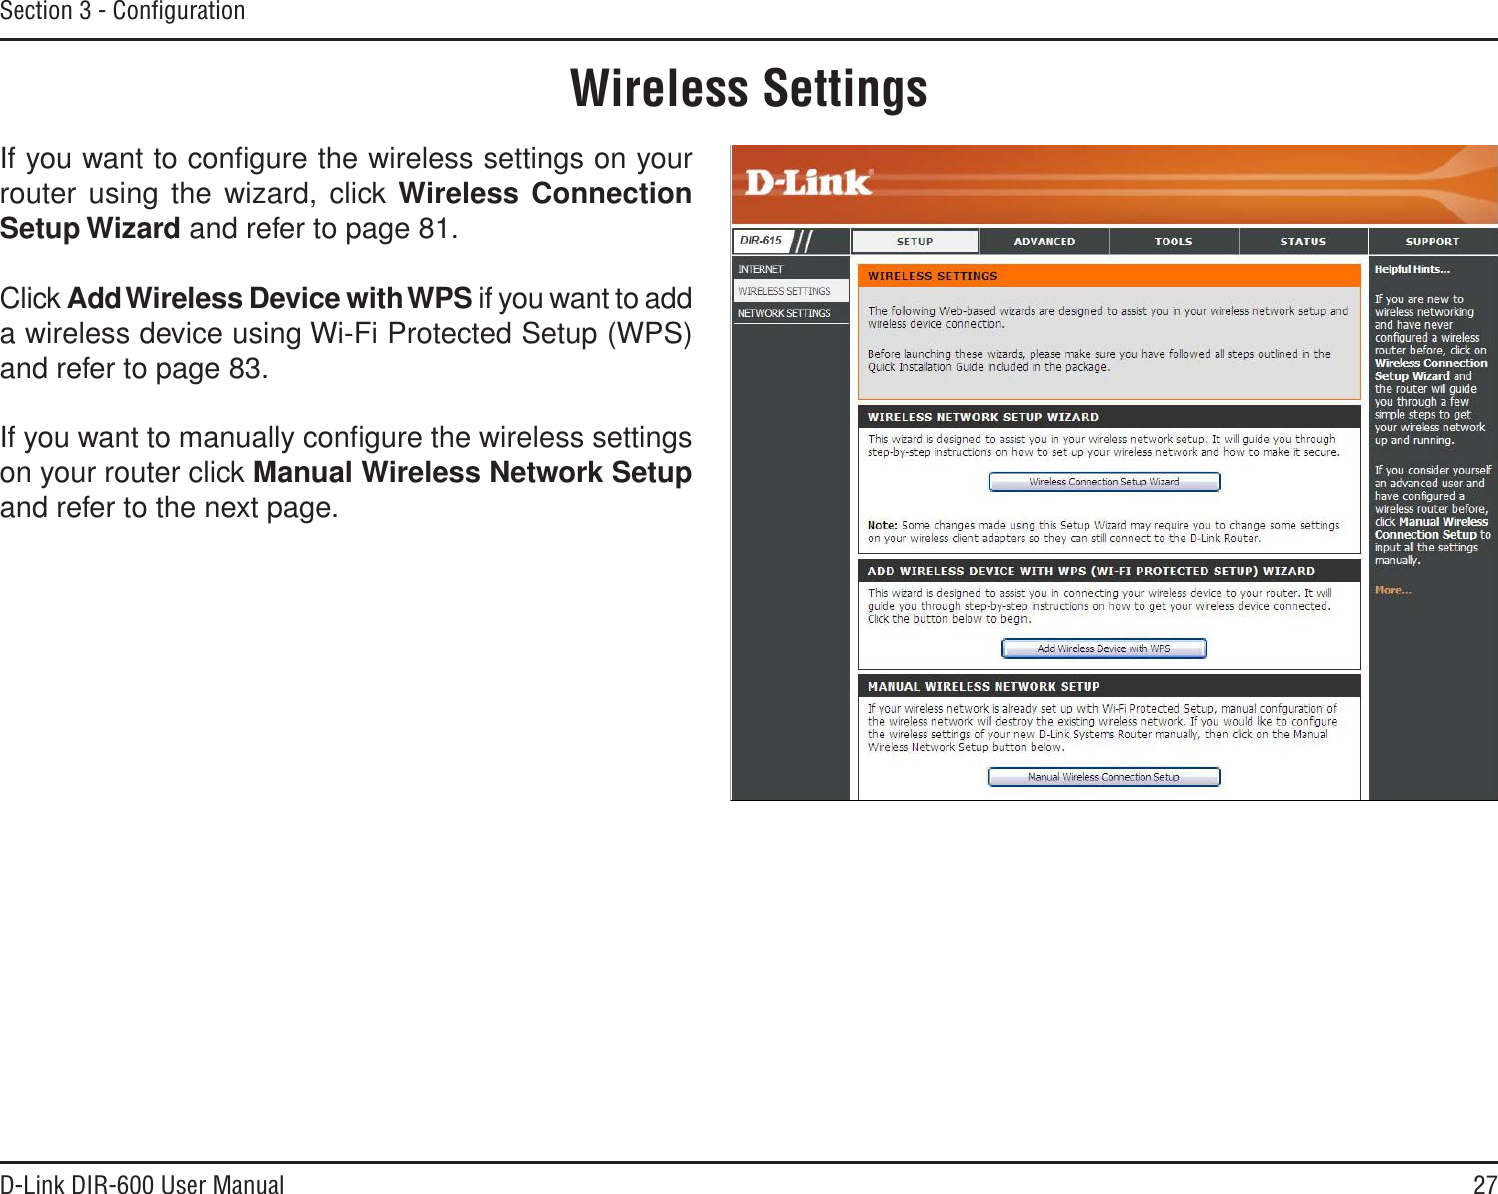 27D-Link DIR-600 User ManualSection 3 - ConﬁgurationWireless SettingsIf you want to conﬁgure the wireless settings on your router using the wizard, click Wireless Connection  Setup Wizard and refer to page 81.Click AddWireless Device withWPS if you want to add a wireless device using Wi-Fi Protected Setup (WPS) and refer to page 83.If you want to manually conﬁgure the wireless settings on your router click Manual Wireless Network Setupand refer to the next page.